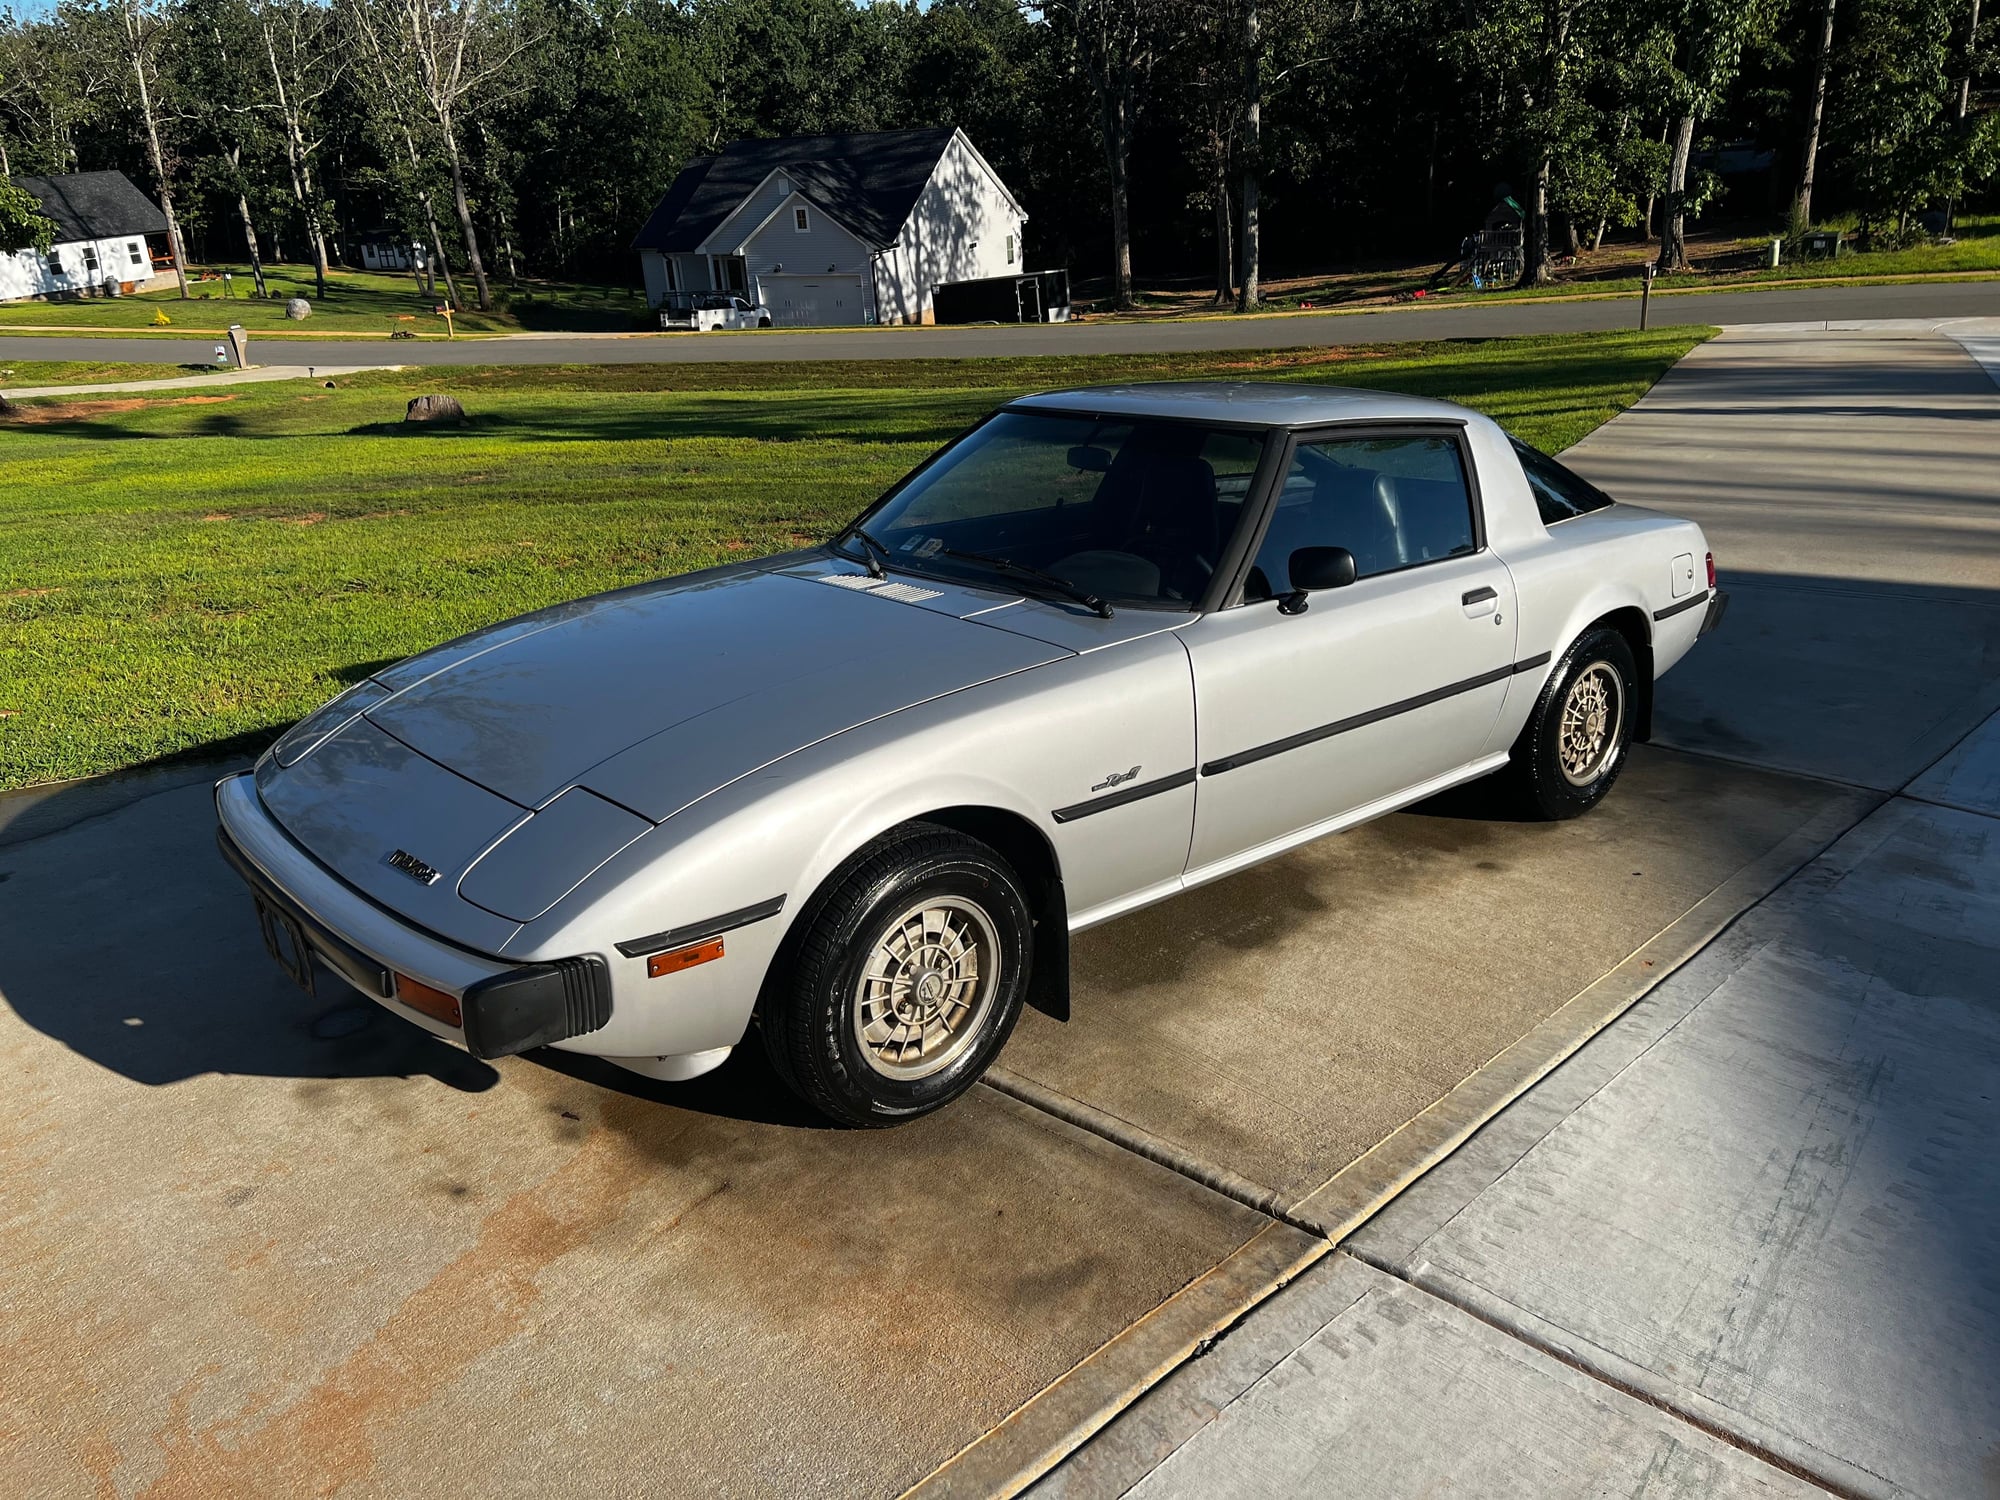 1979 Mazda RX-7 - Gen 1 1979 Mazda RX-7 - Used - VIN SA22C501478 - 133,686 Miles - 2 cyl - 2WD - Manual - Coupe - Silver - Maiden, NC 28650, United States